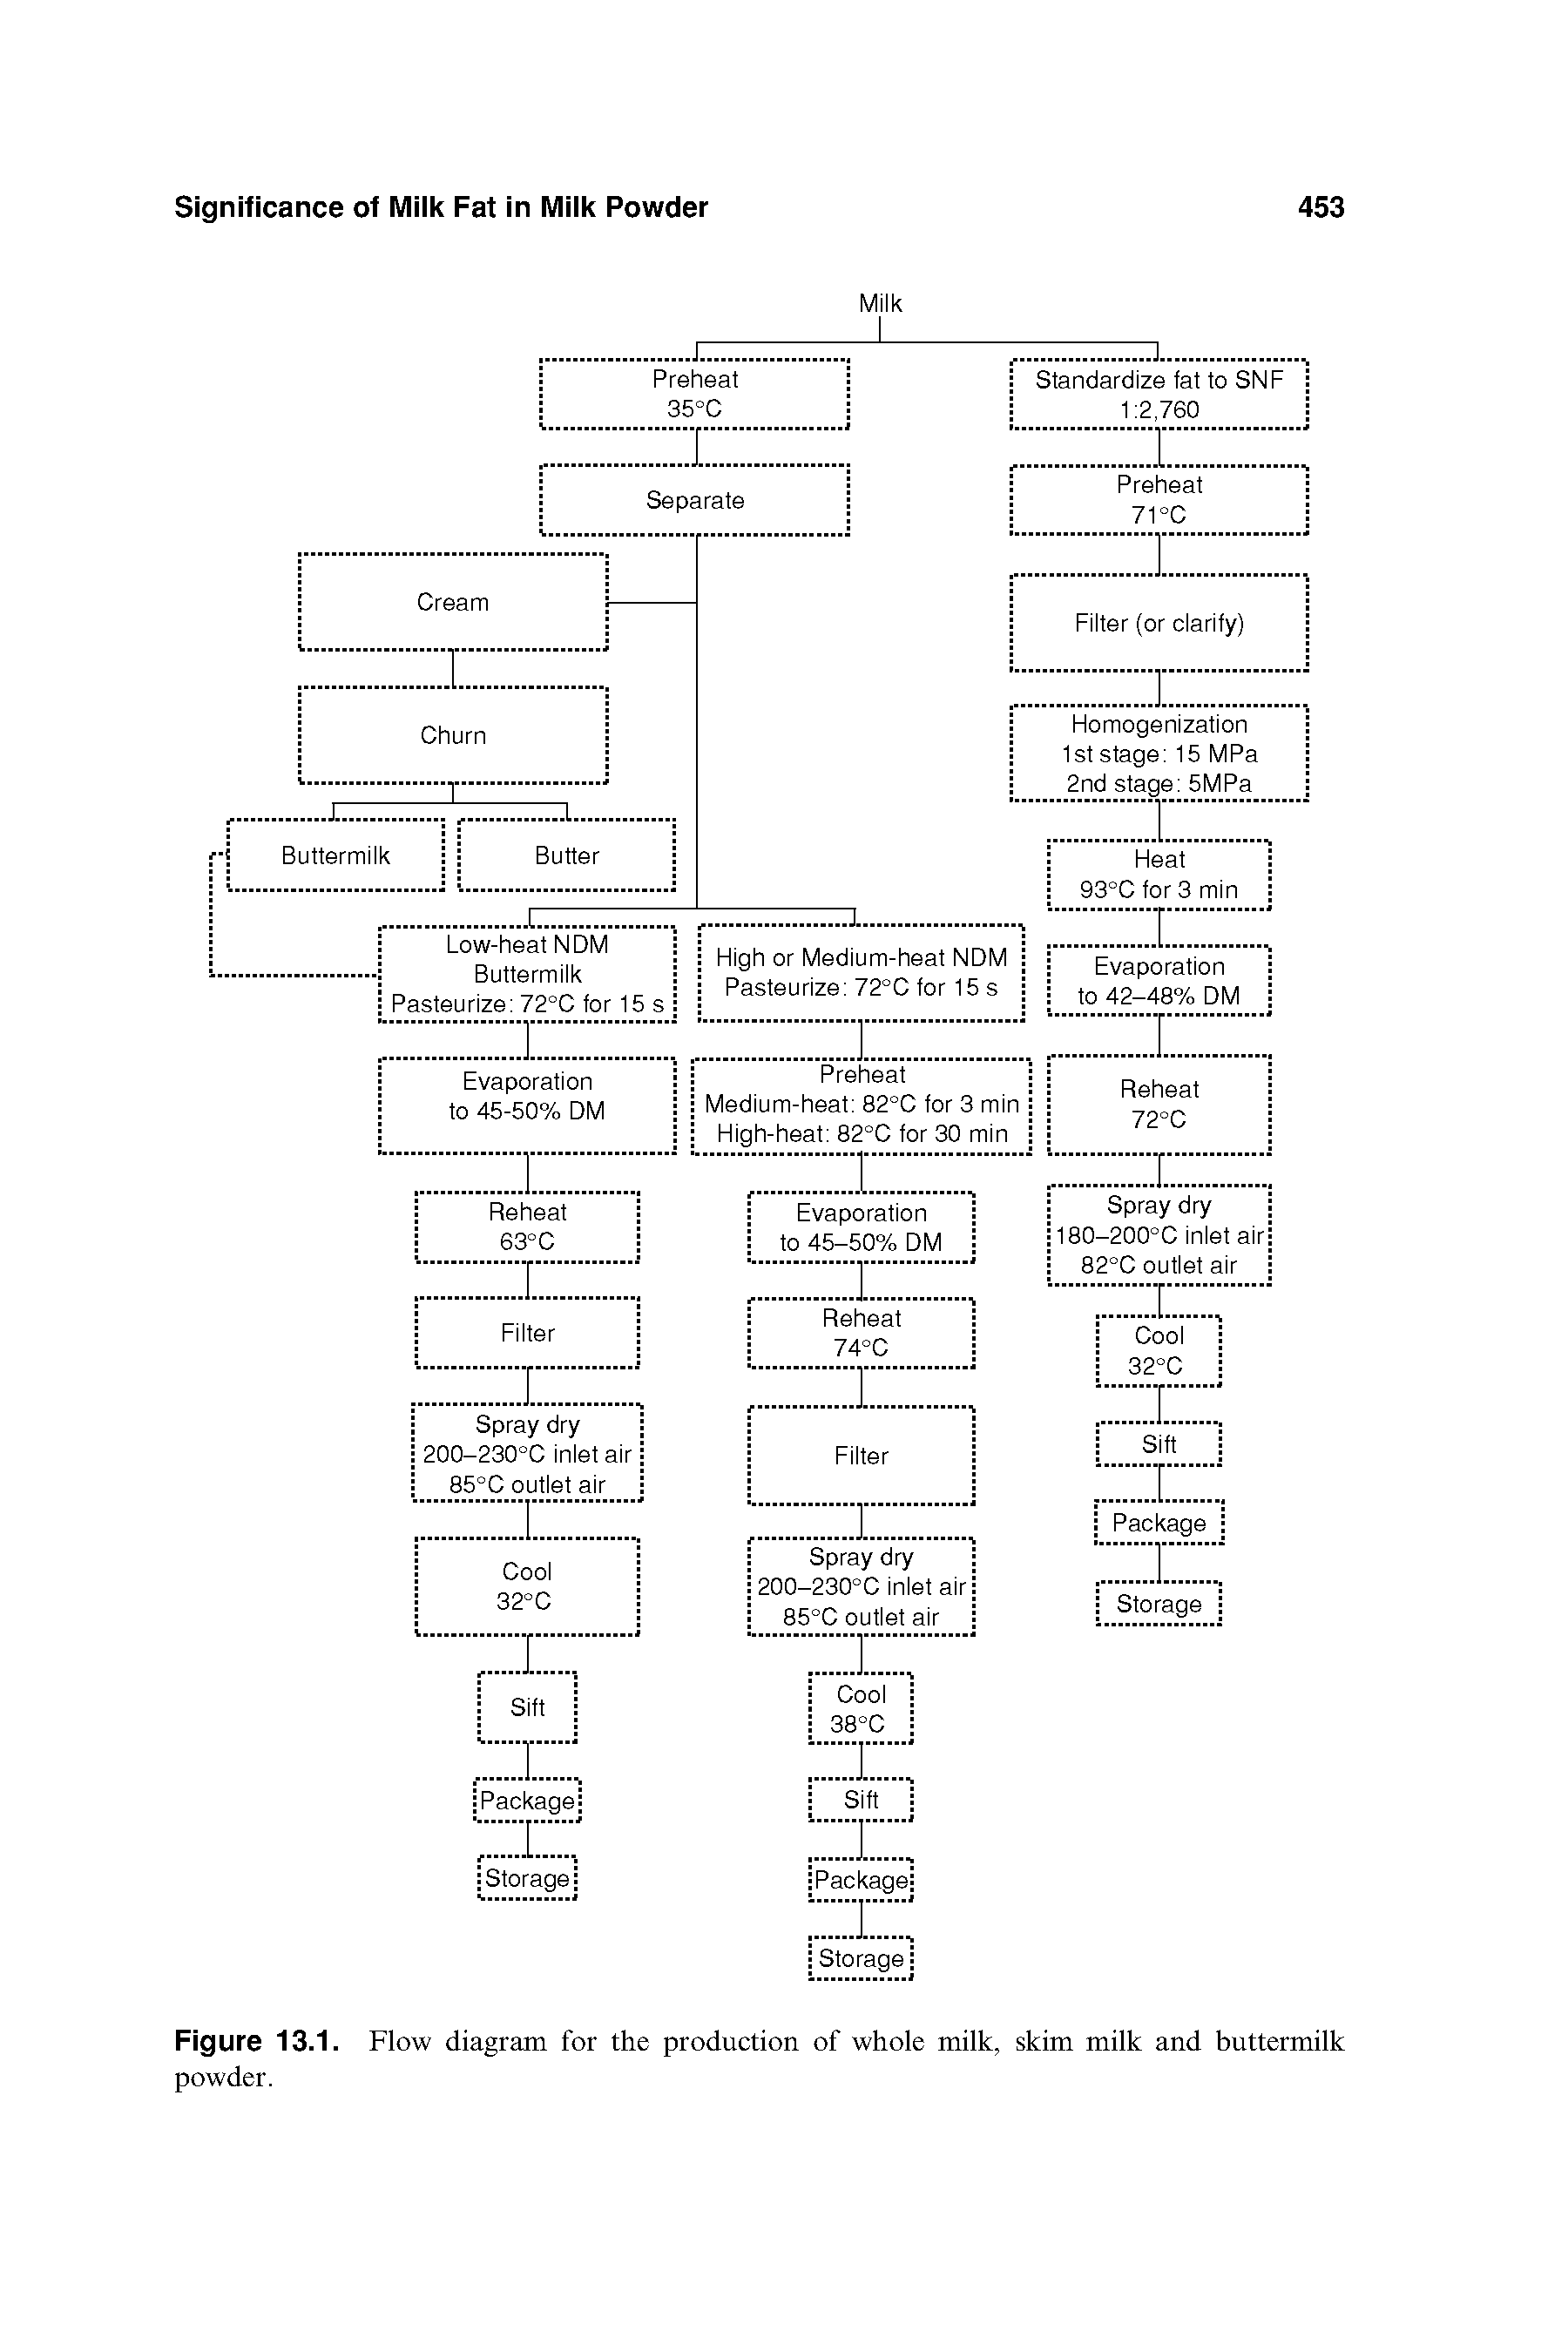 Figure 13.1. Flow diagram for the production of whole milk, skim milk and buttermilk powder.